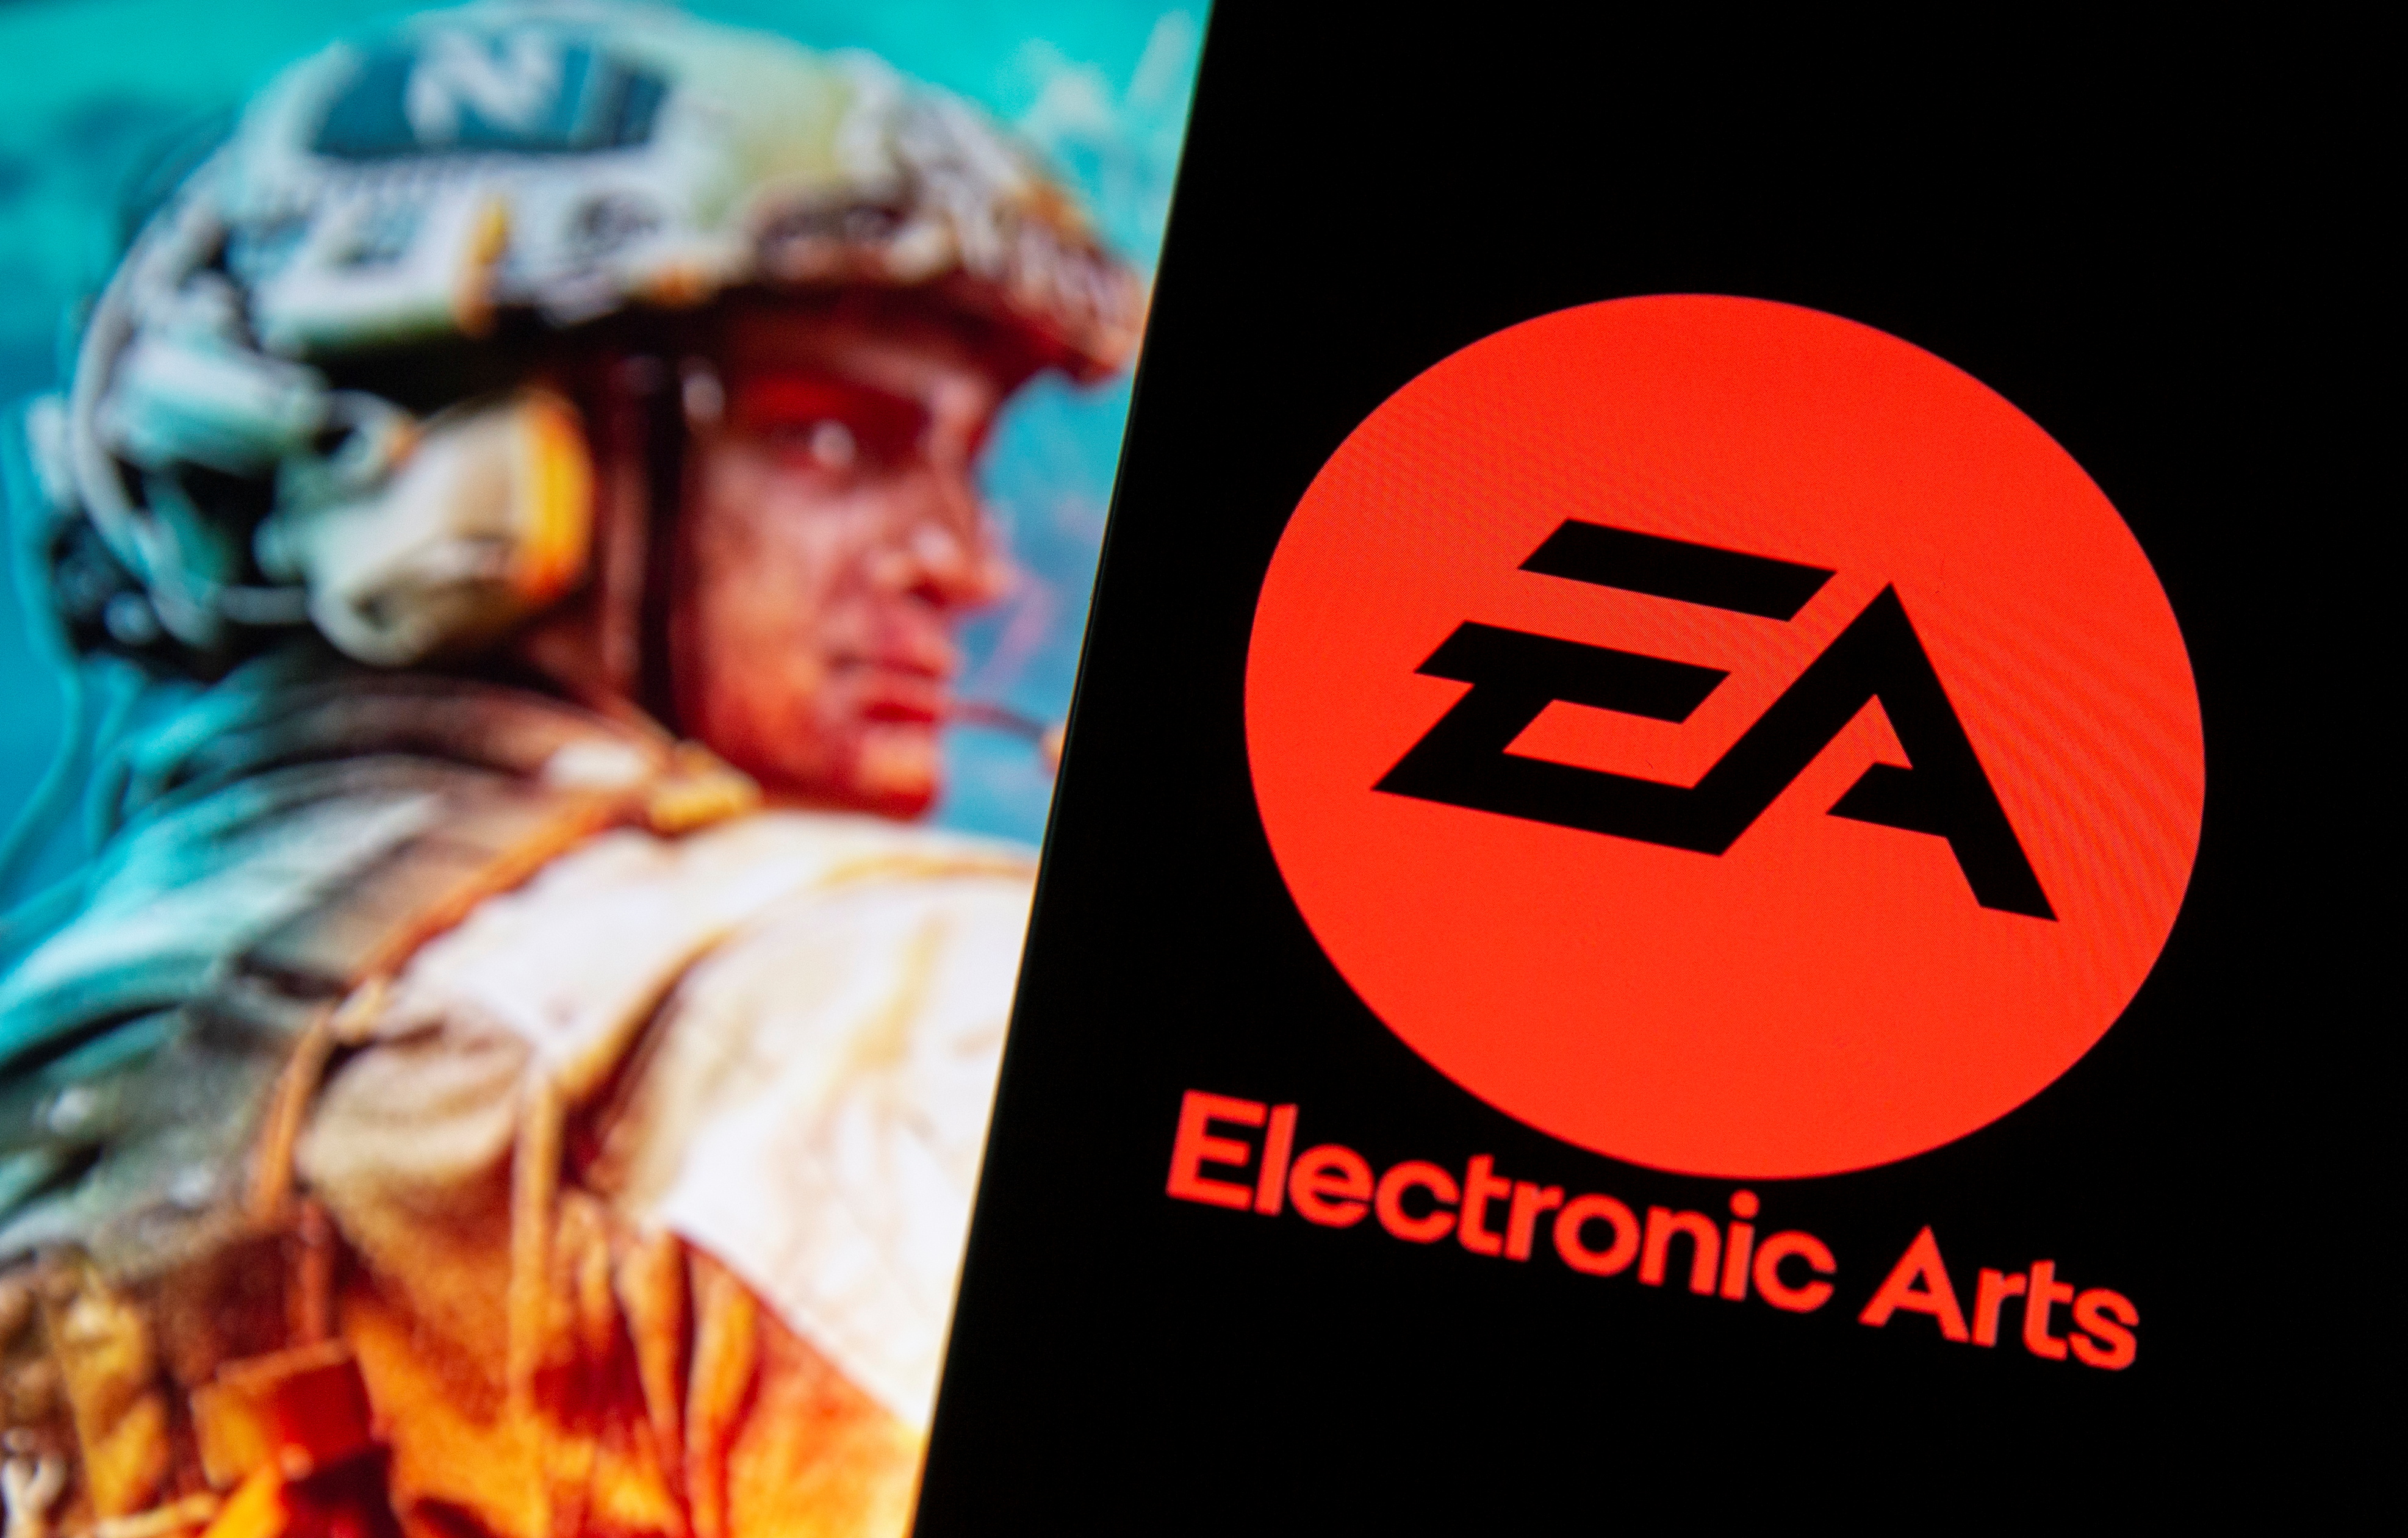 Stocks moving after-hours: Electronic Arts, RH